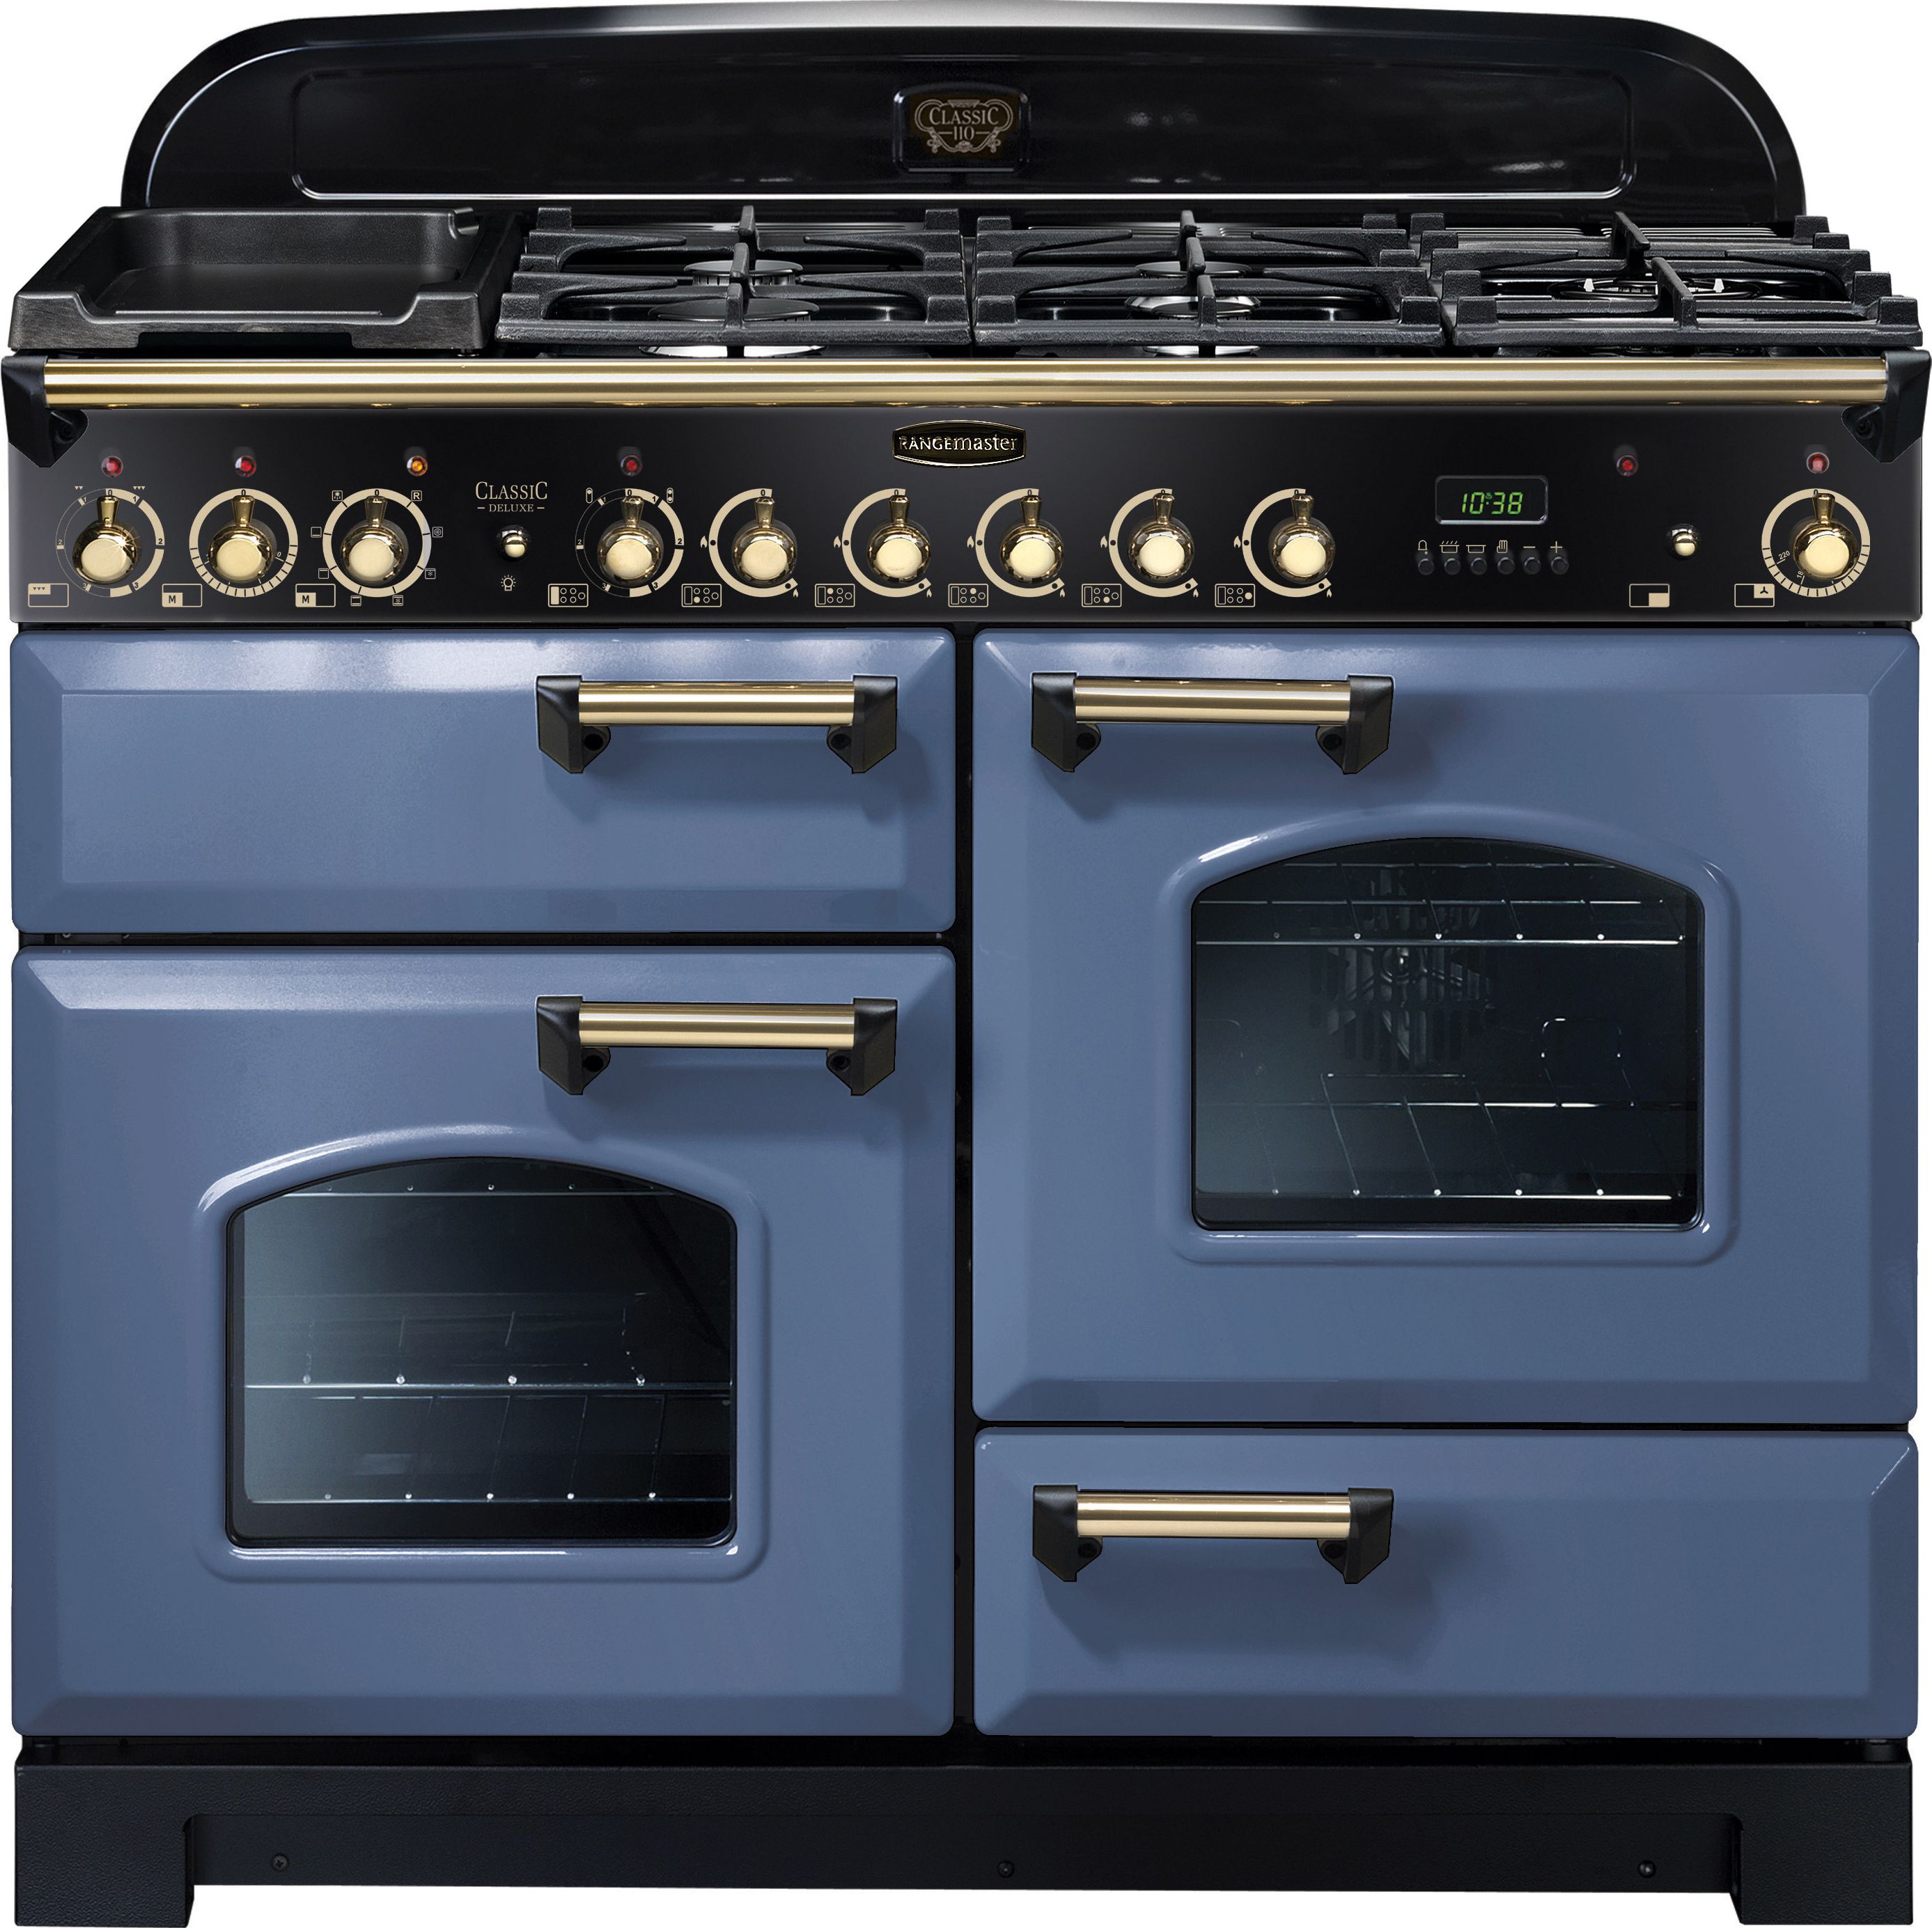 Rangemaster Classic Deluxe CDL110DFFSB/B 110cm Dual Fuel Range Cooker - Stone Blue / Brass - A/A Rated, Blue